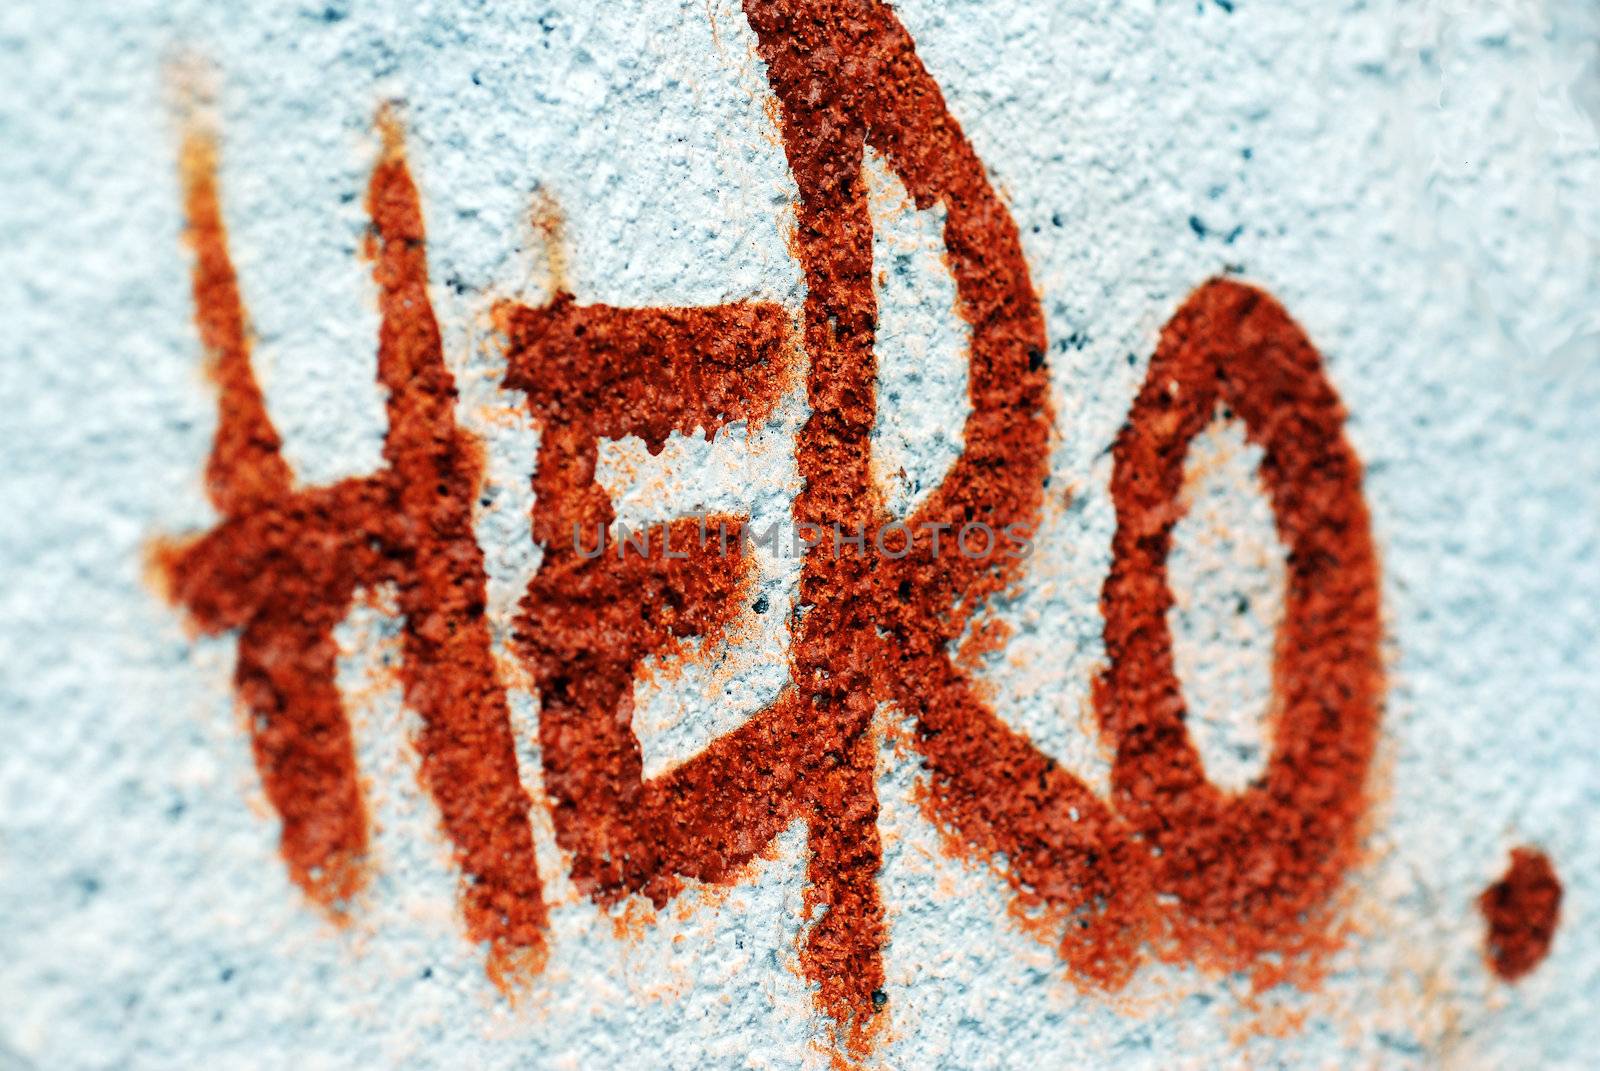 A photograph of the word Hero spray painted onto a public wall